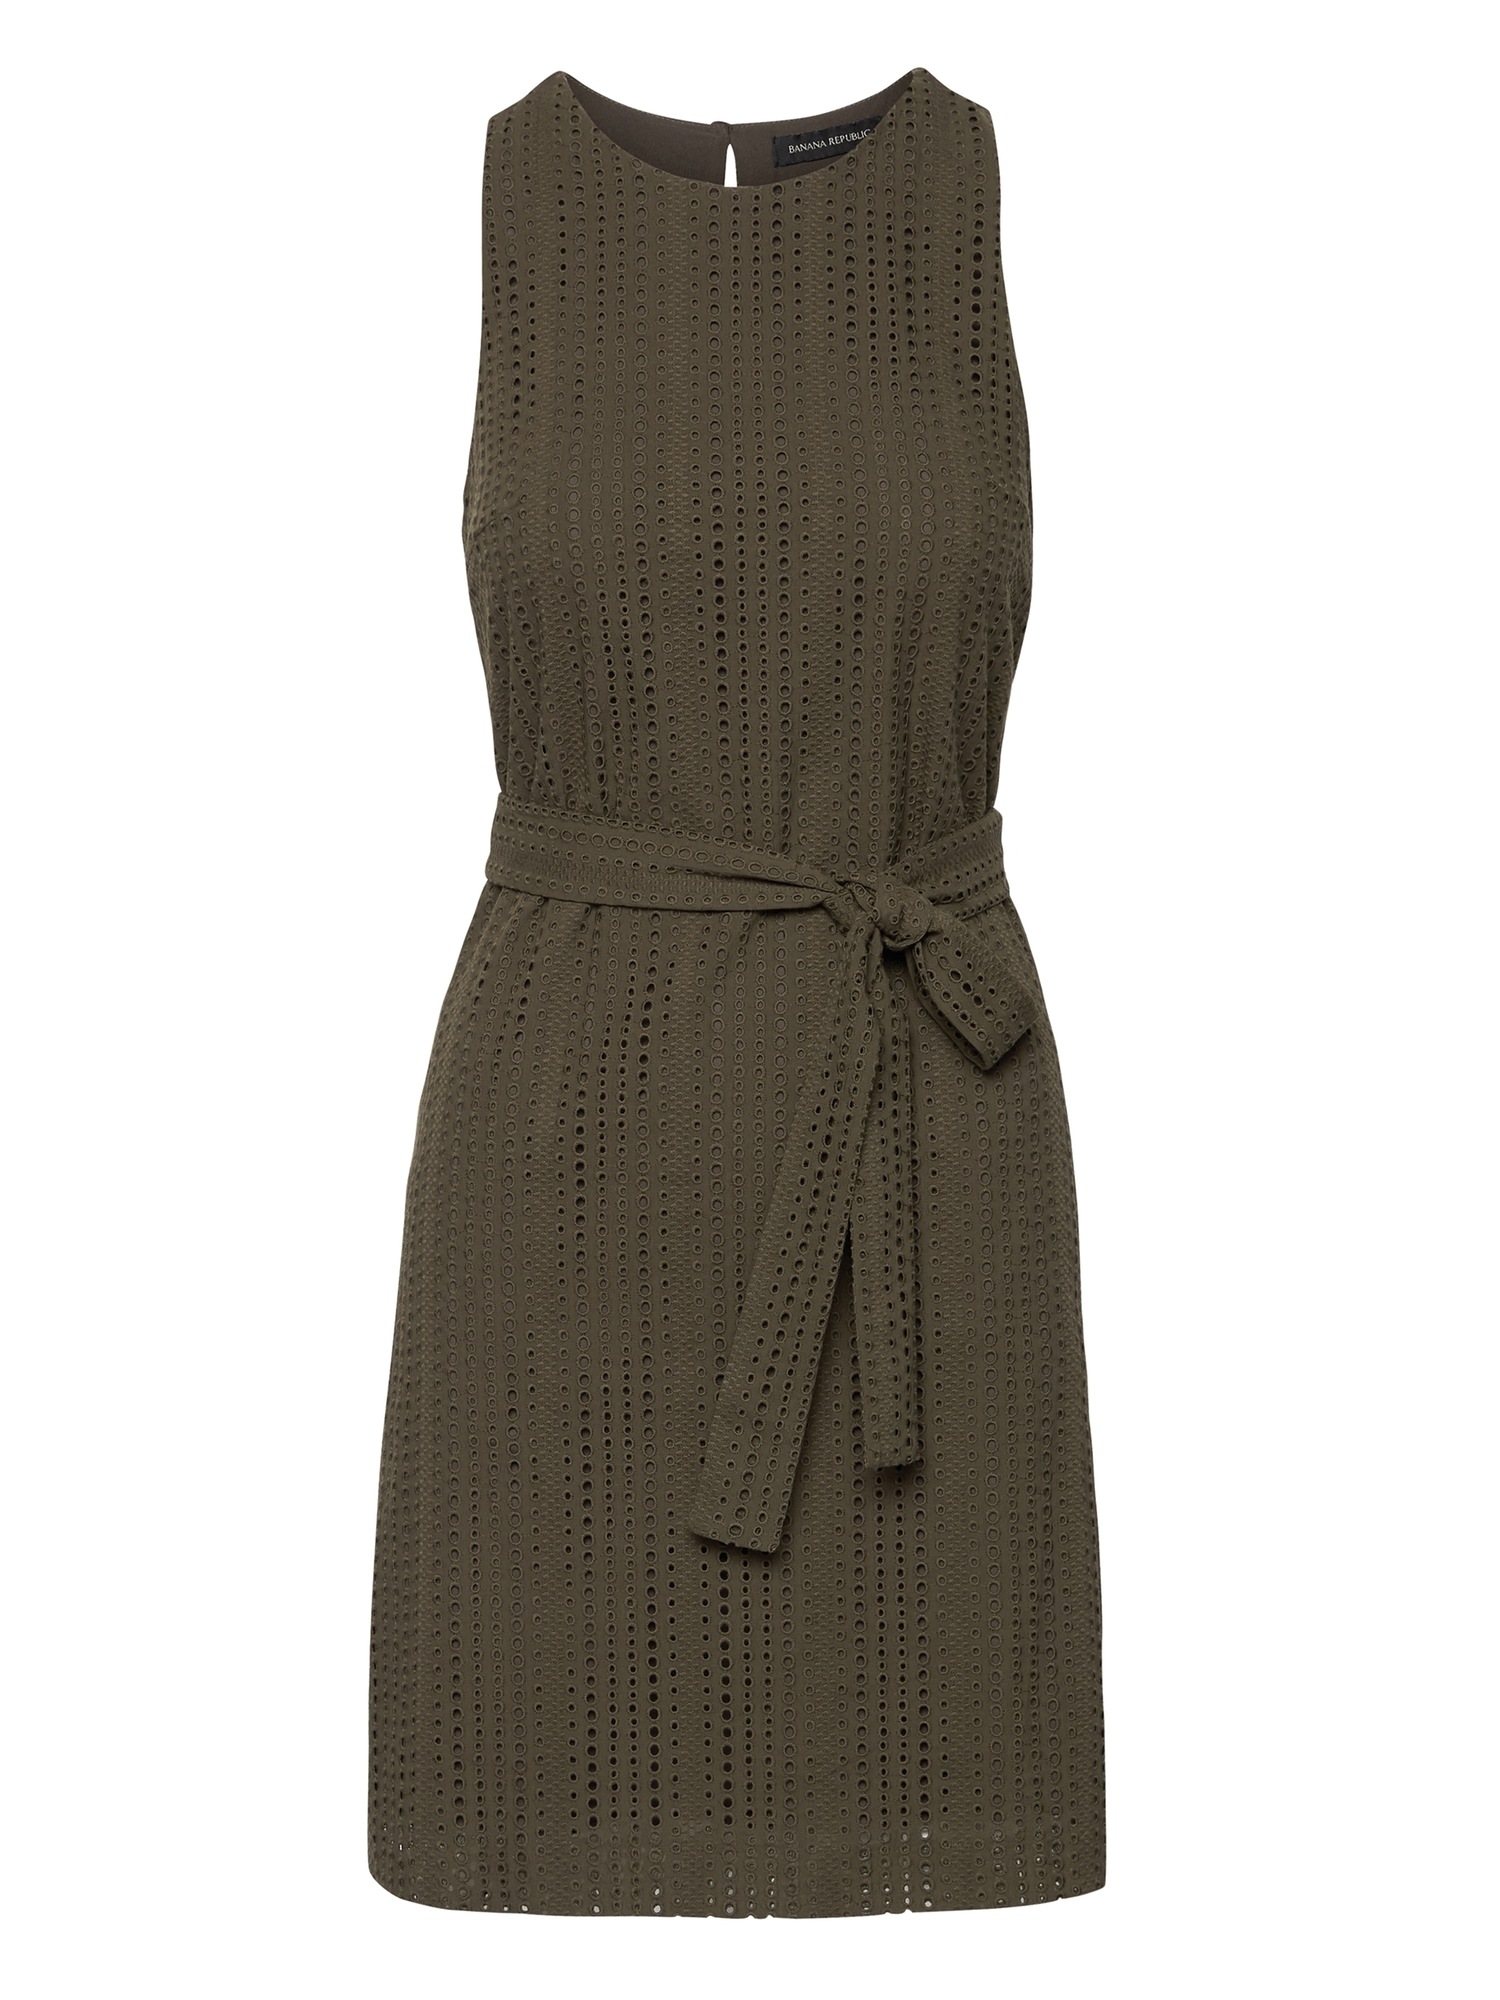 Eyelet Shift Dress with Tie at Waist